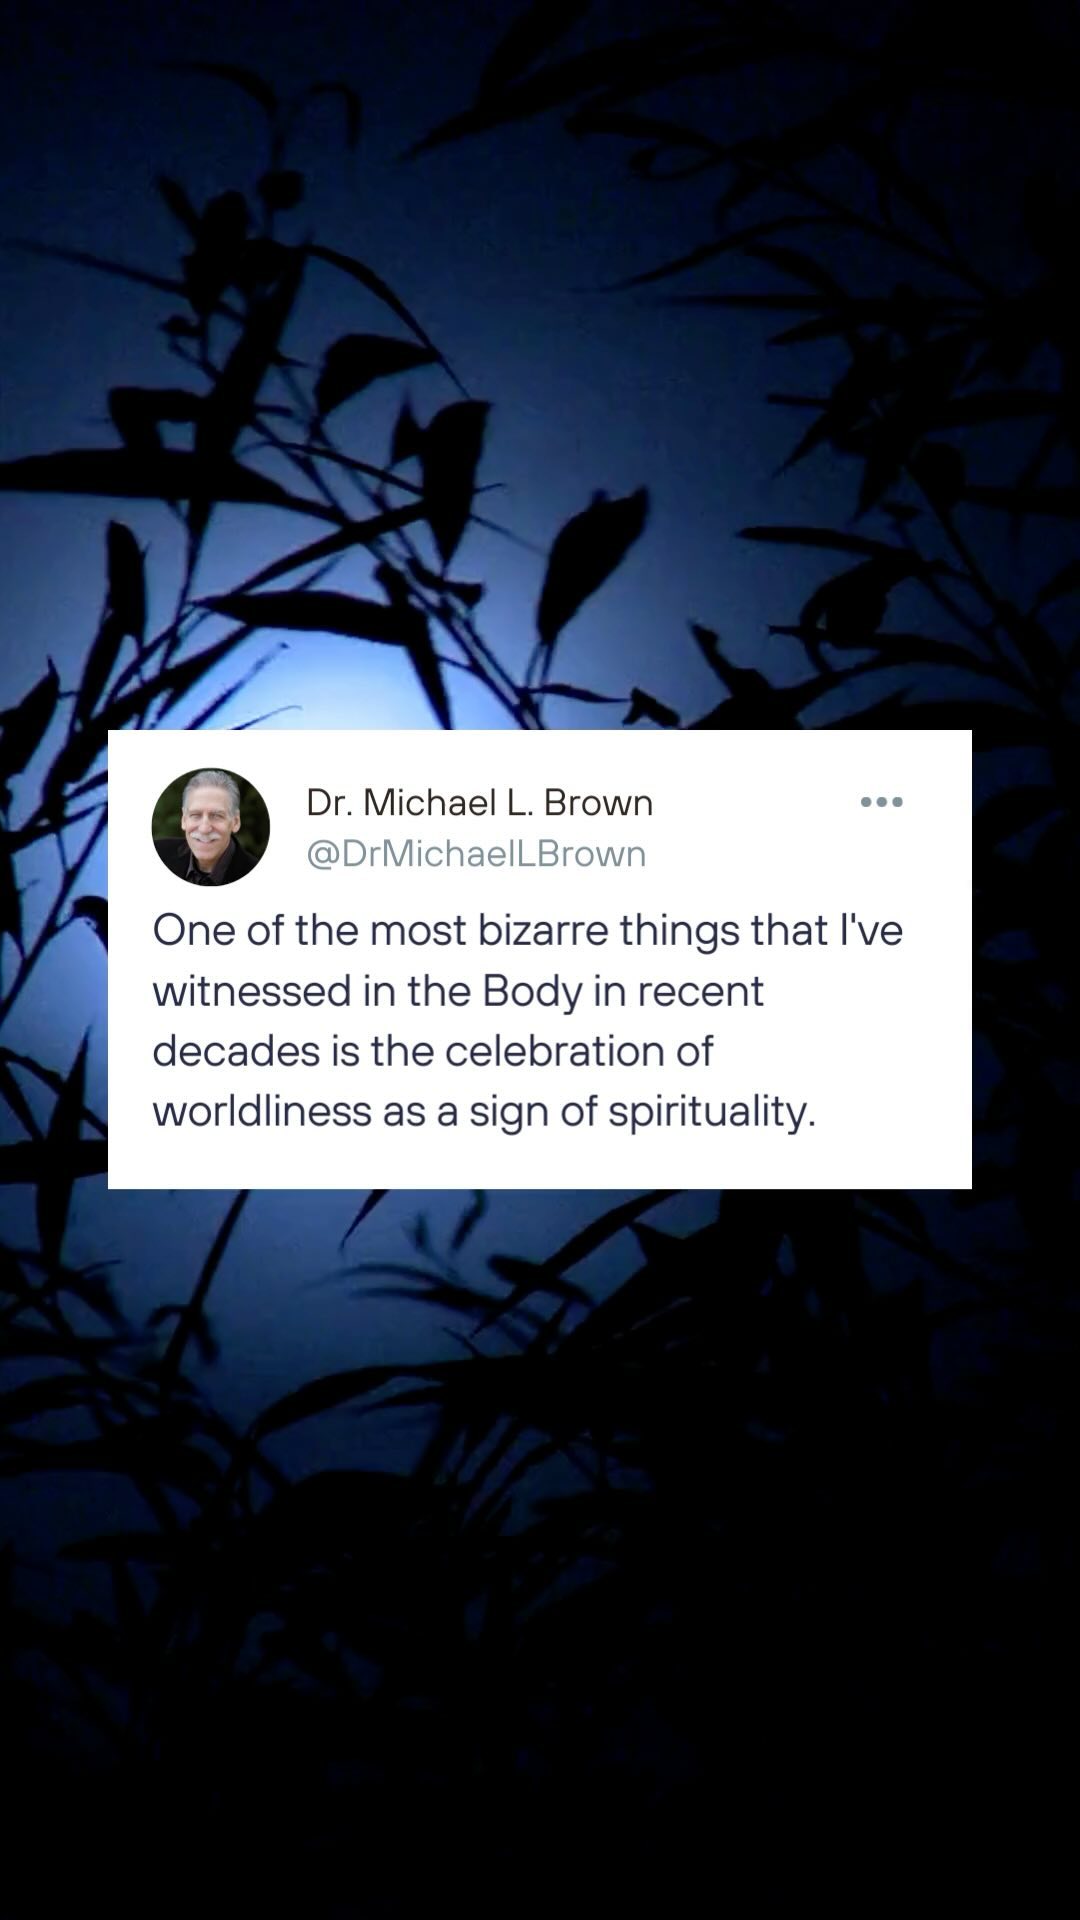 One of the most bizarre things that I've witnessed in the Body in recent decades is the celebration of worldliness as a sign of spirituality.
#askdrbrown #drbrownquotes #famousquotes #quotestoinspire  #Godswork #twitter #politics #views #quotestoinspire  #dailywisdom #faithhopelove